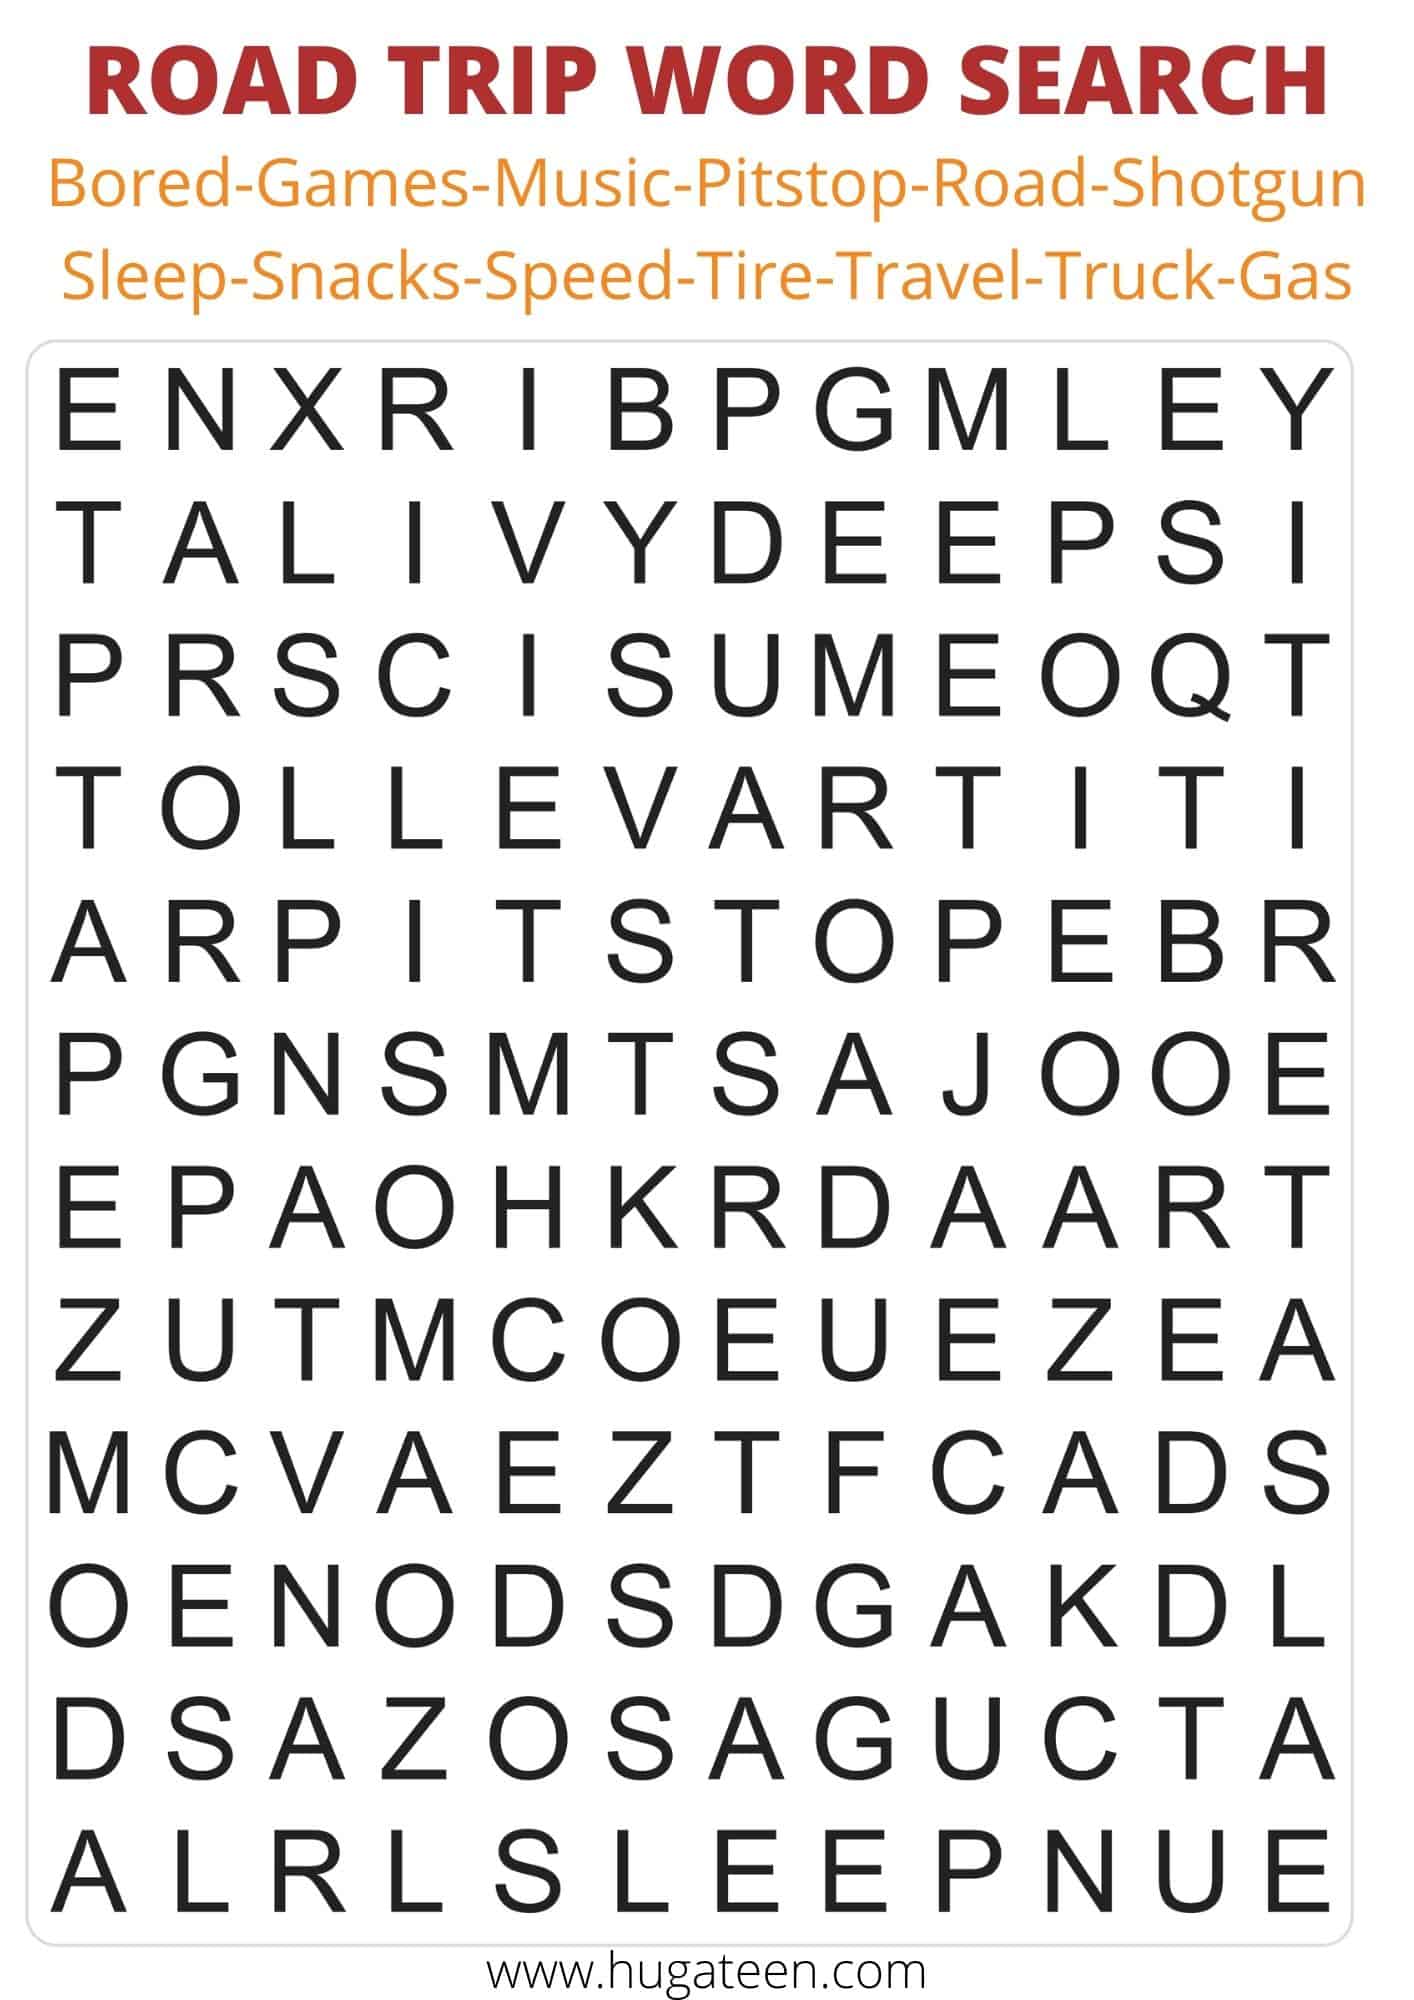 Road trip Word Search